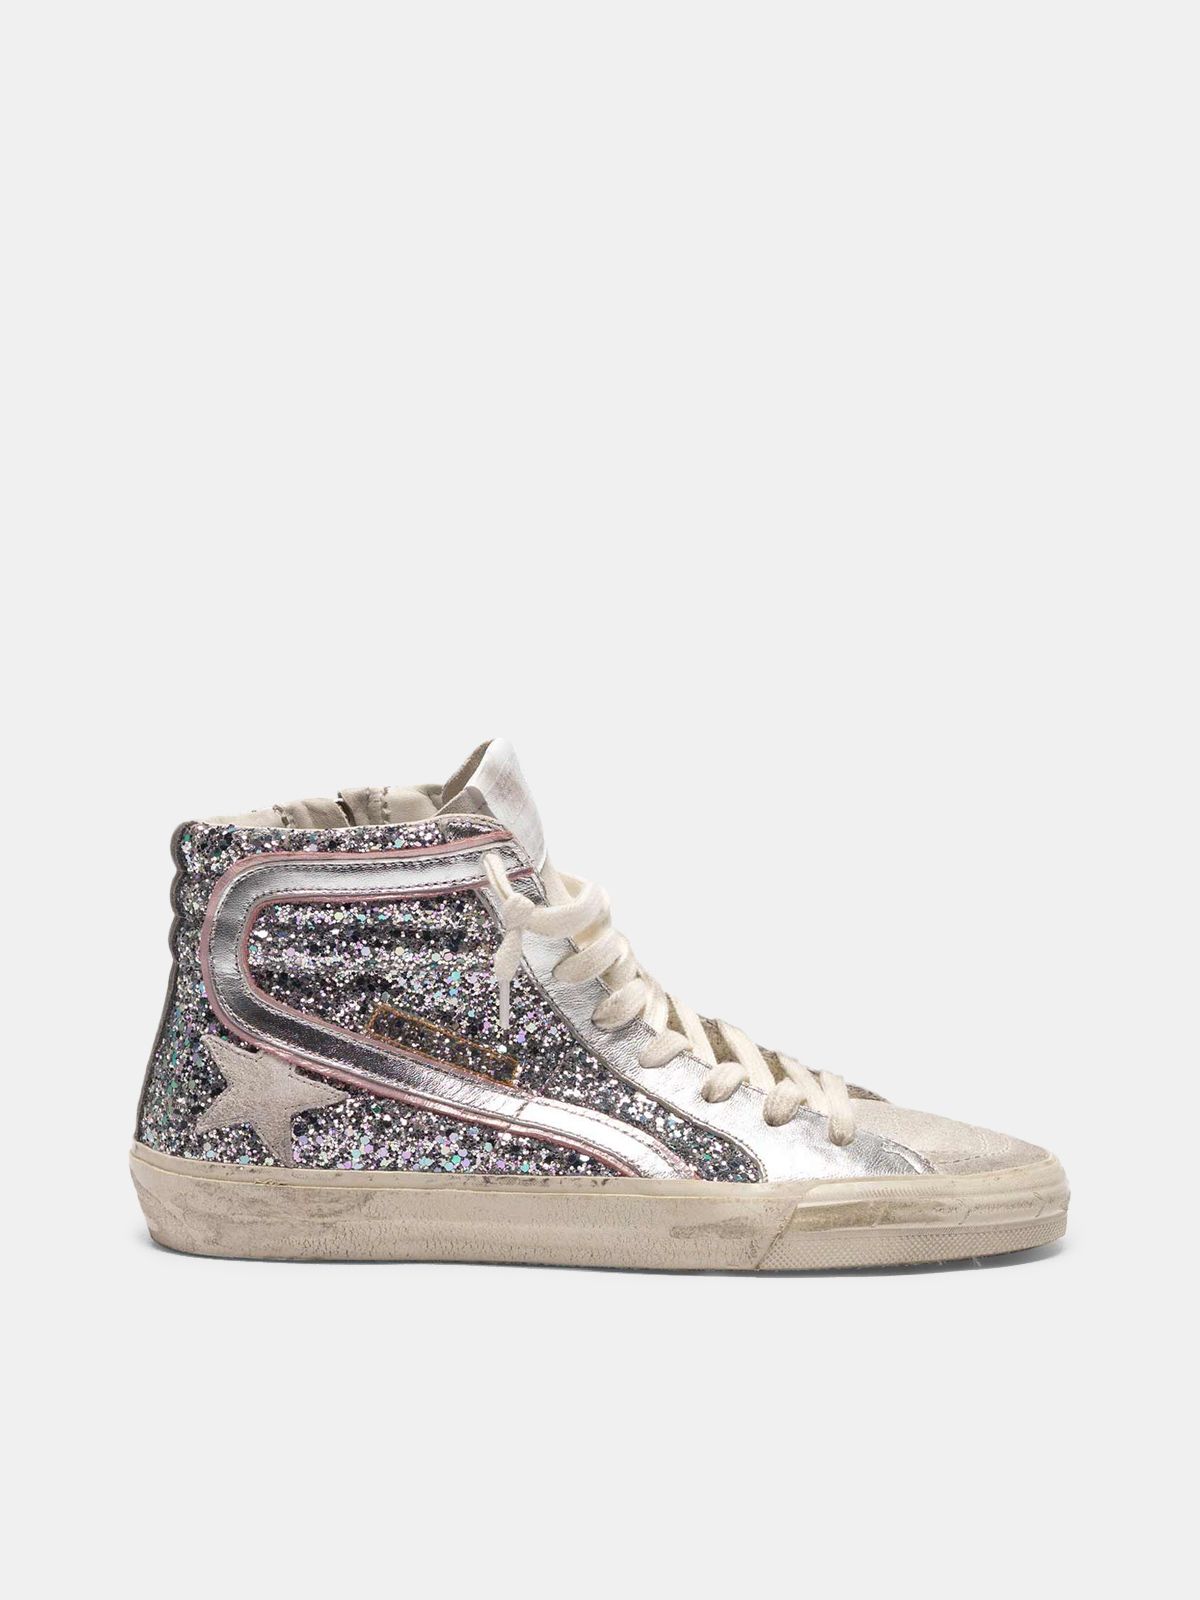 Slide sneakers in silver laminated leather and glitter | Golden Goose